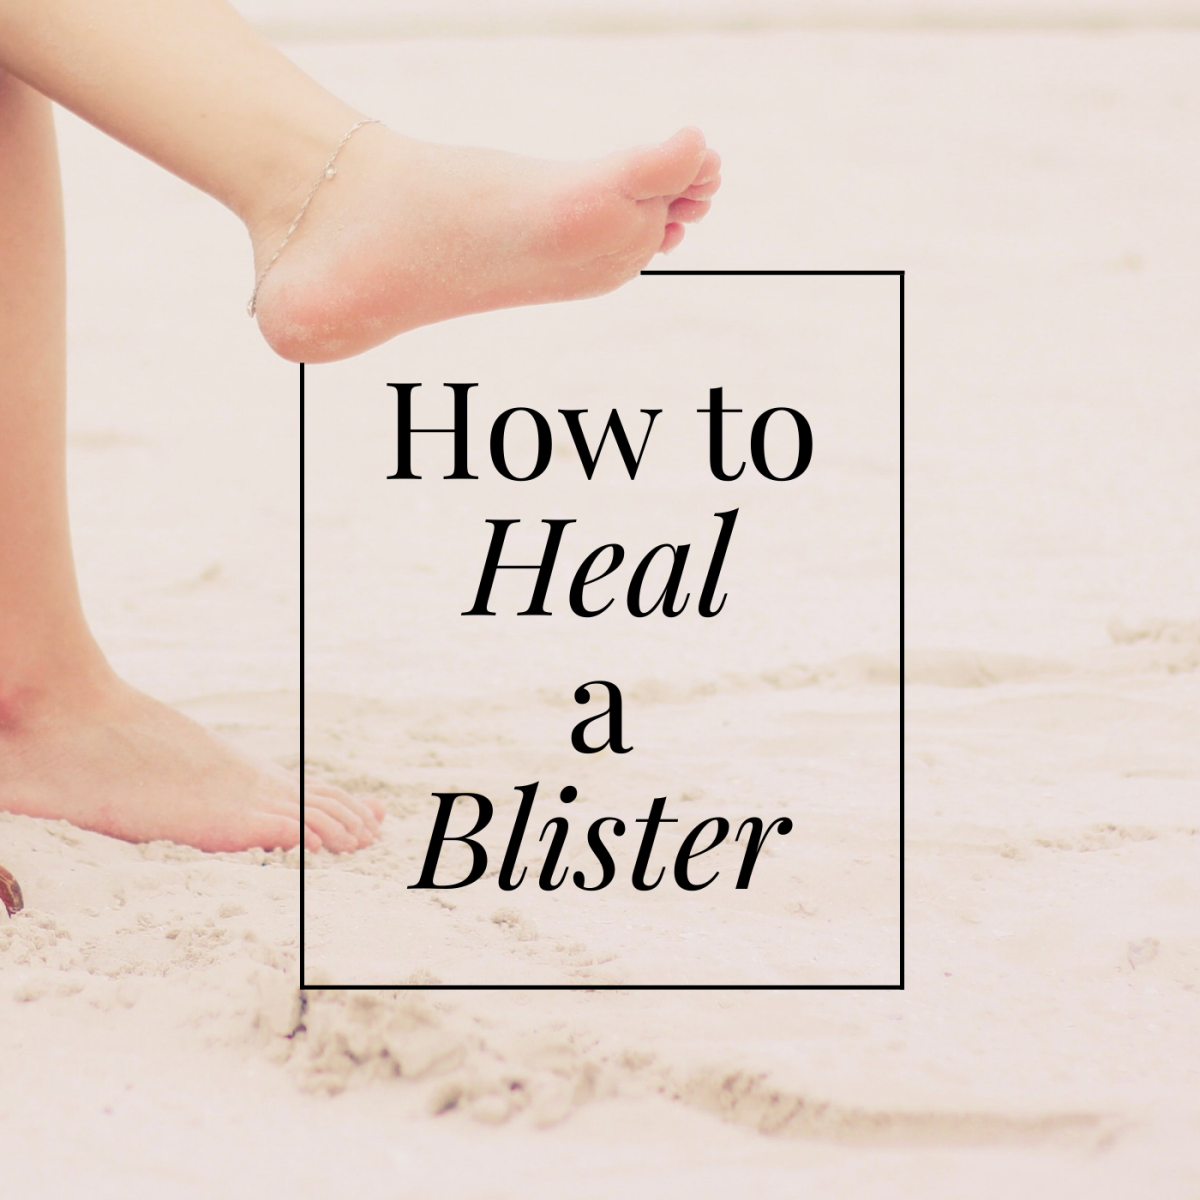 Blisters: Causes and Treatment